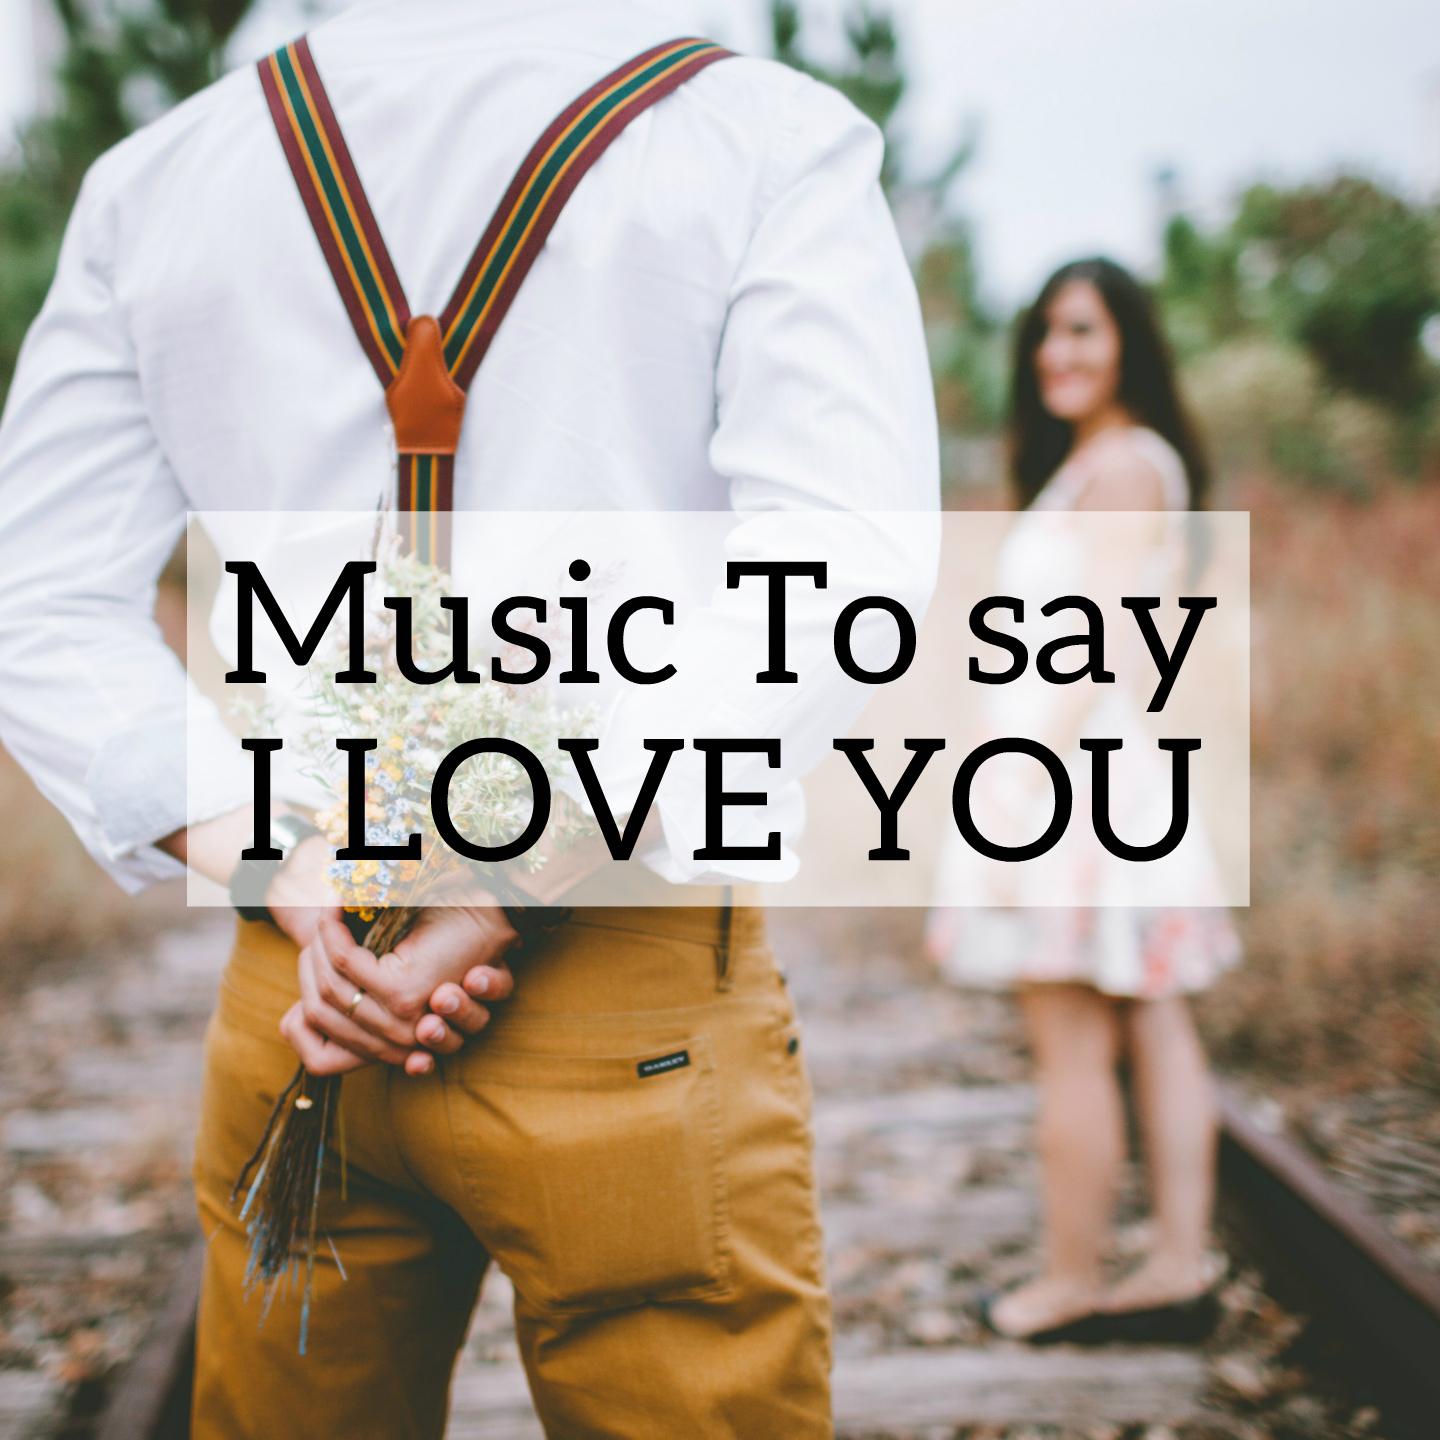 Music to say I love you